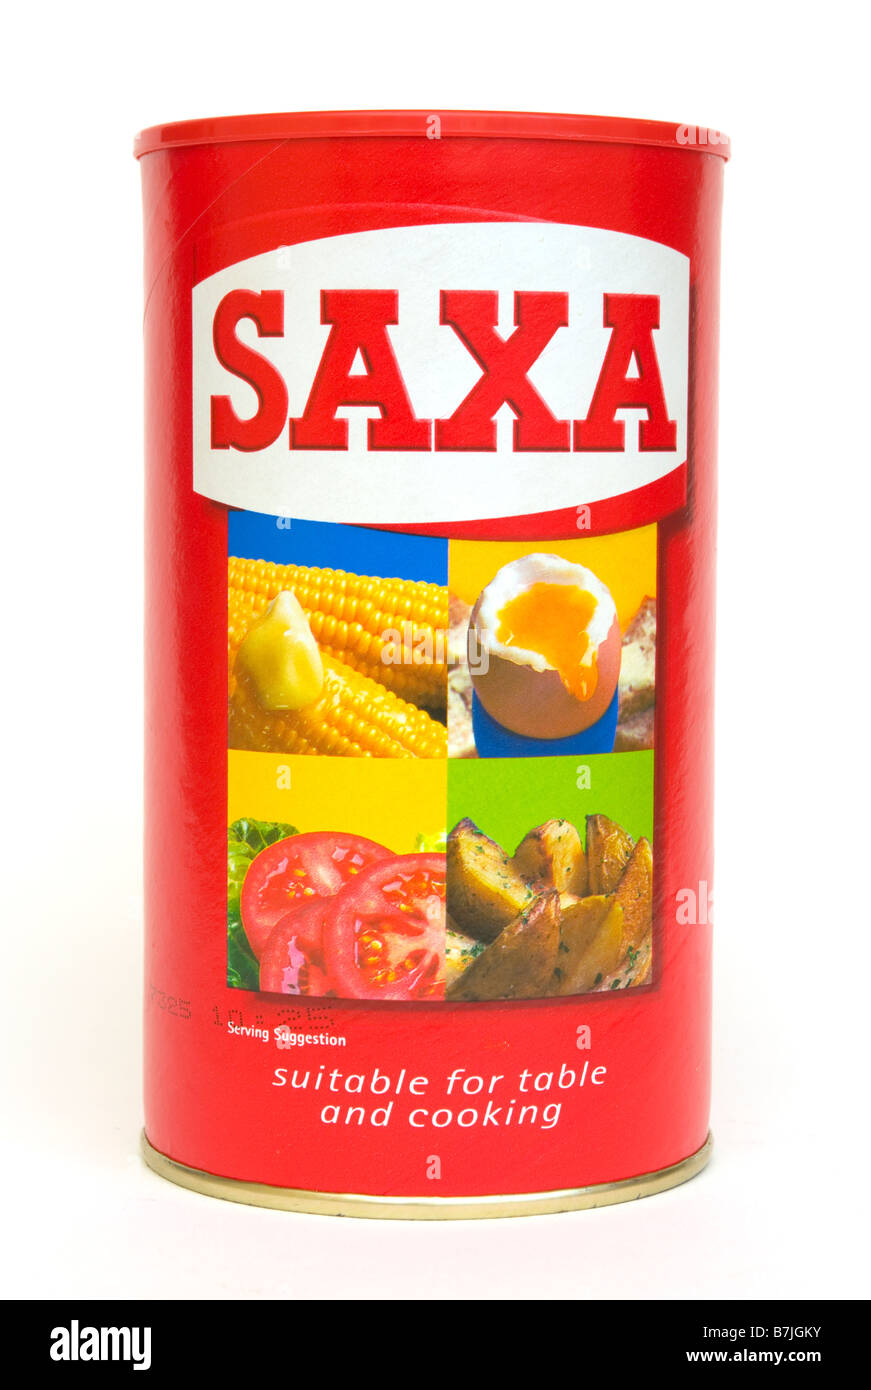 Saxa Table Salt Container Cooking Salts condiments condiment Stock Photo